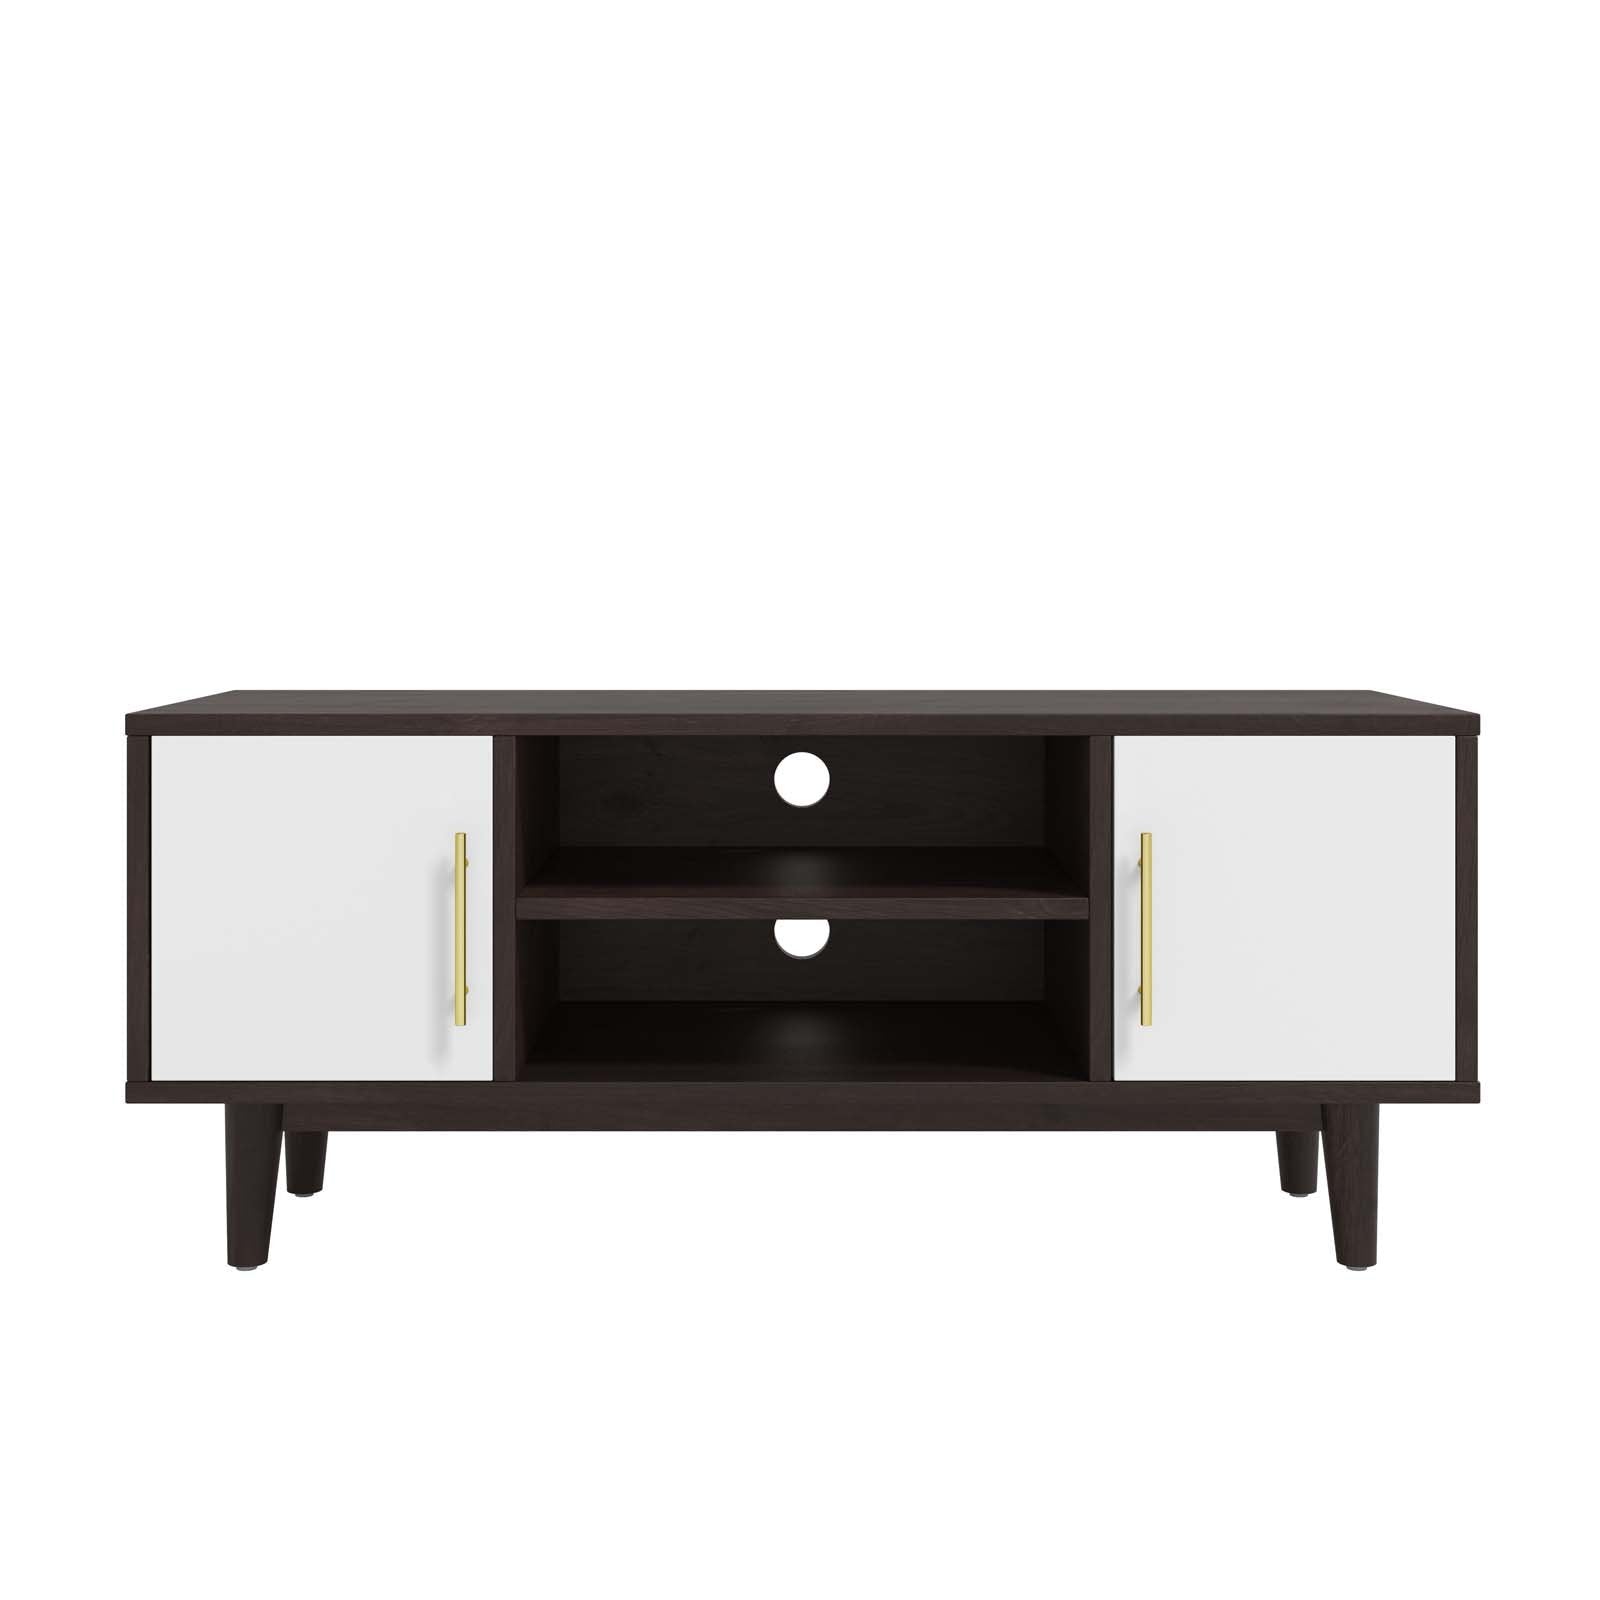 Daxton 43" TV Stand - East Shore Modern Home Furnishings